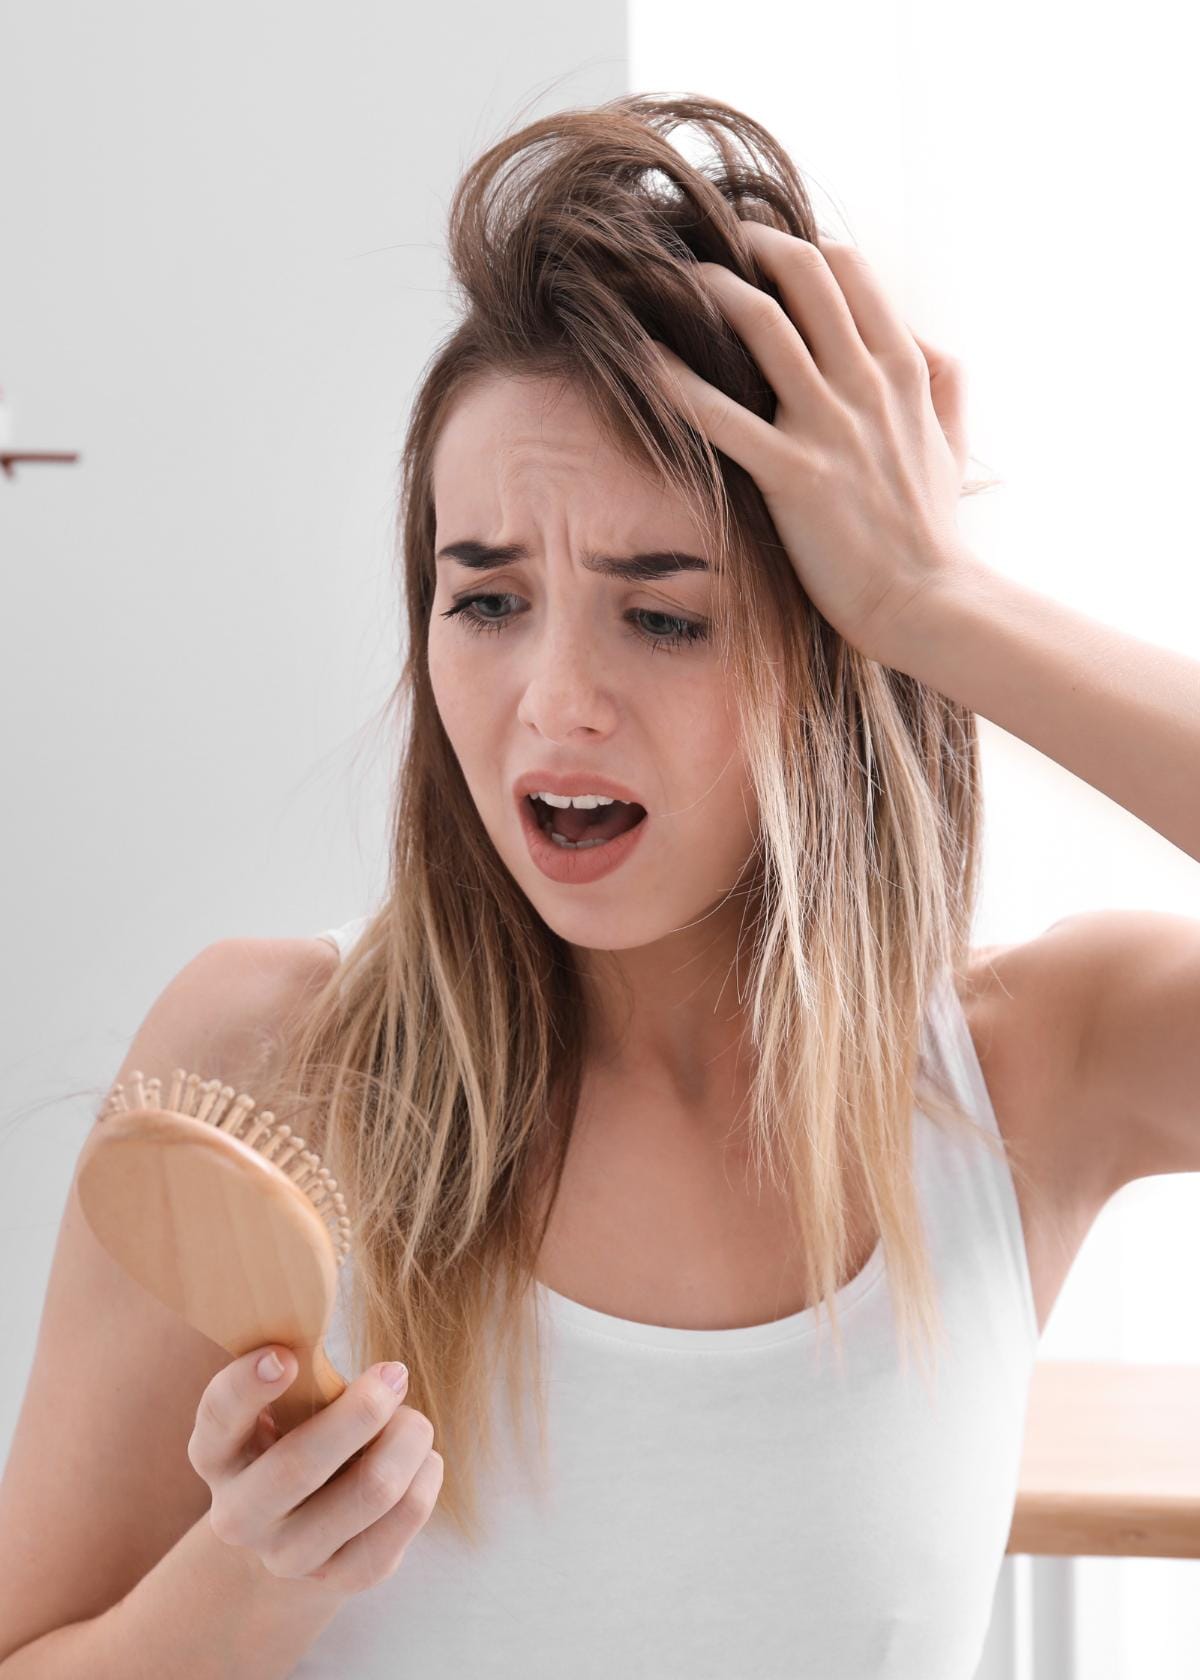 Does Thinning Your Hair Damage It: Learn About Its Pros and Cons